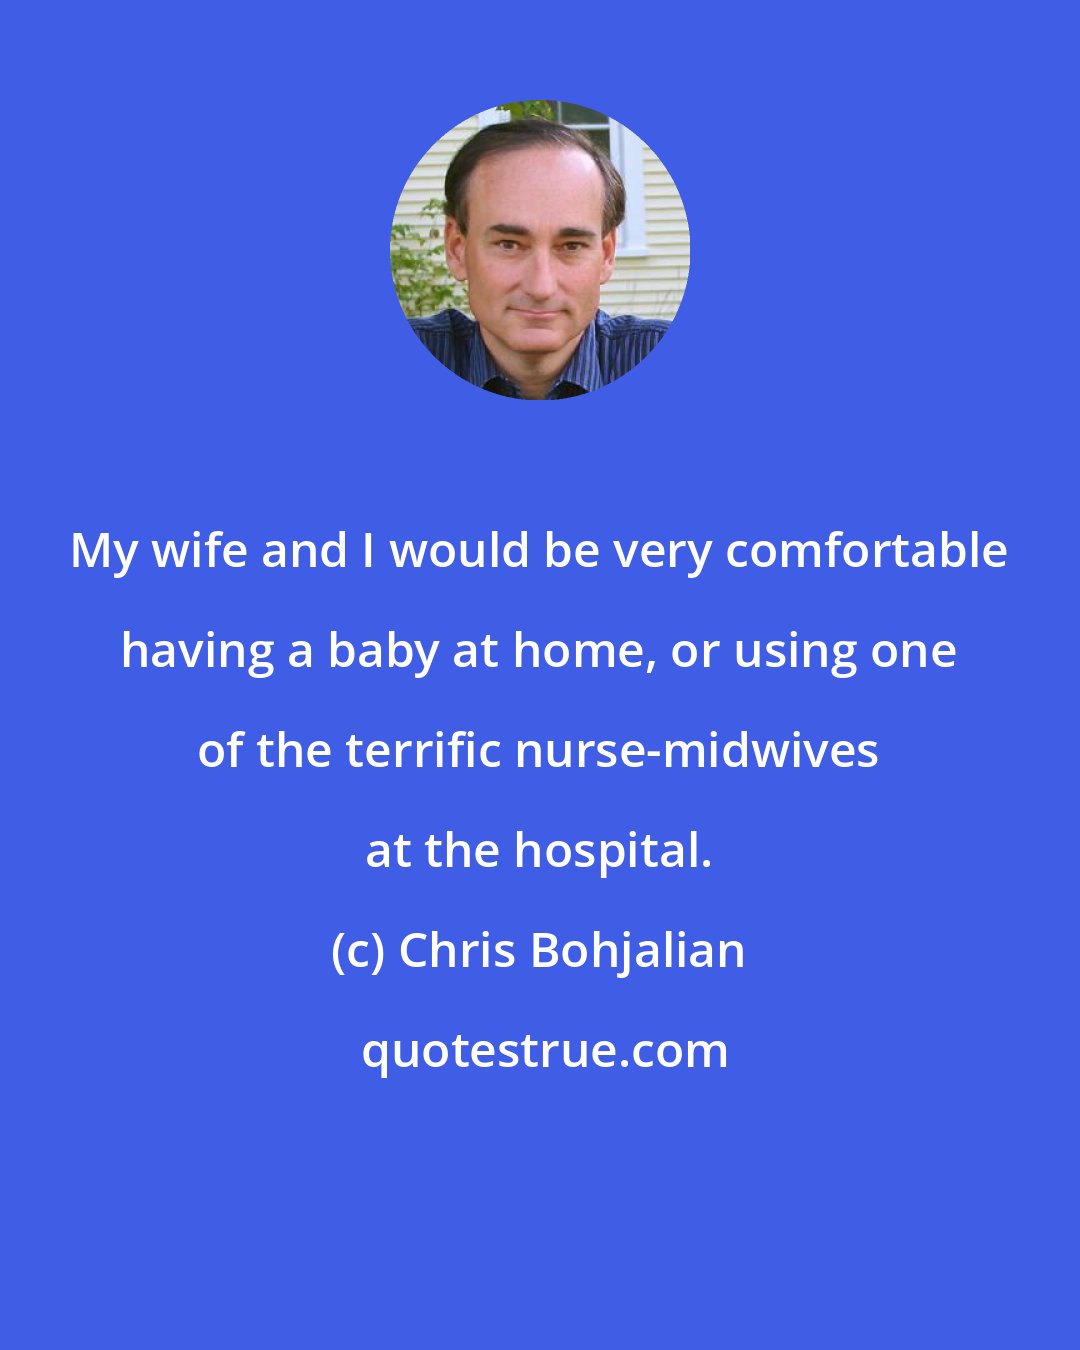 Chris Bohjalian: My wife and I would be very comfortable having a baby at home, or using one of the terrific nurse-midwives at the hospital.